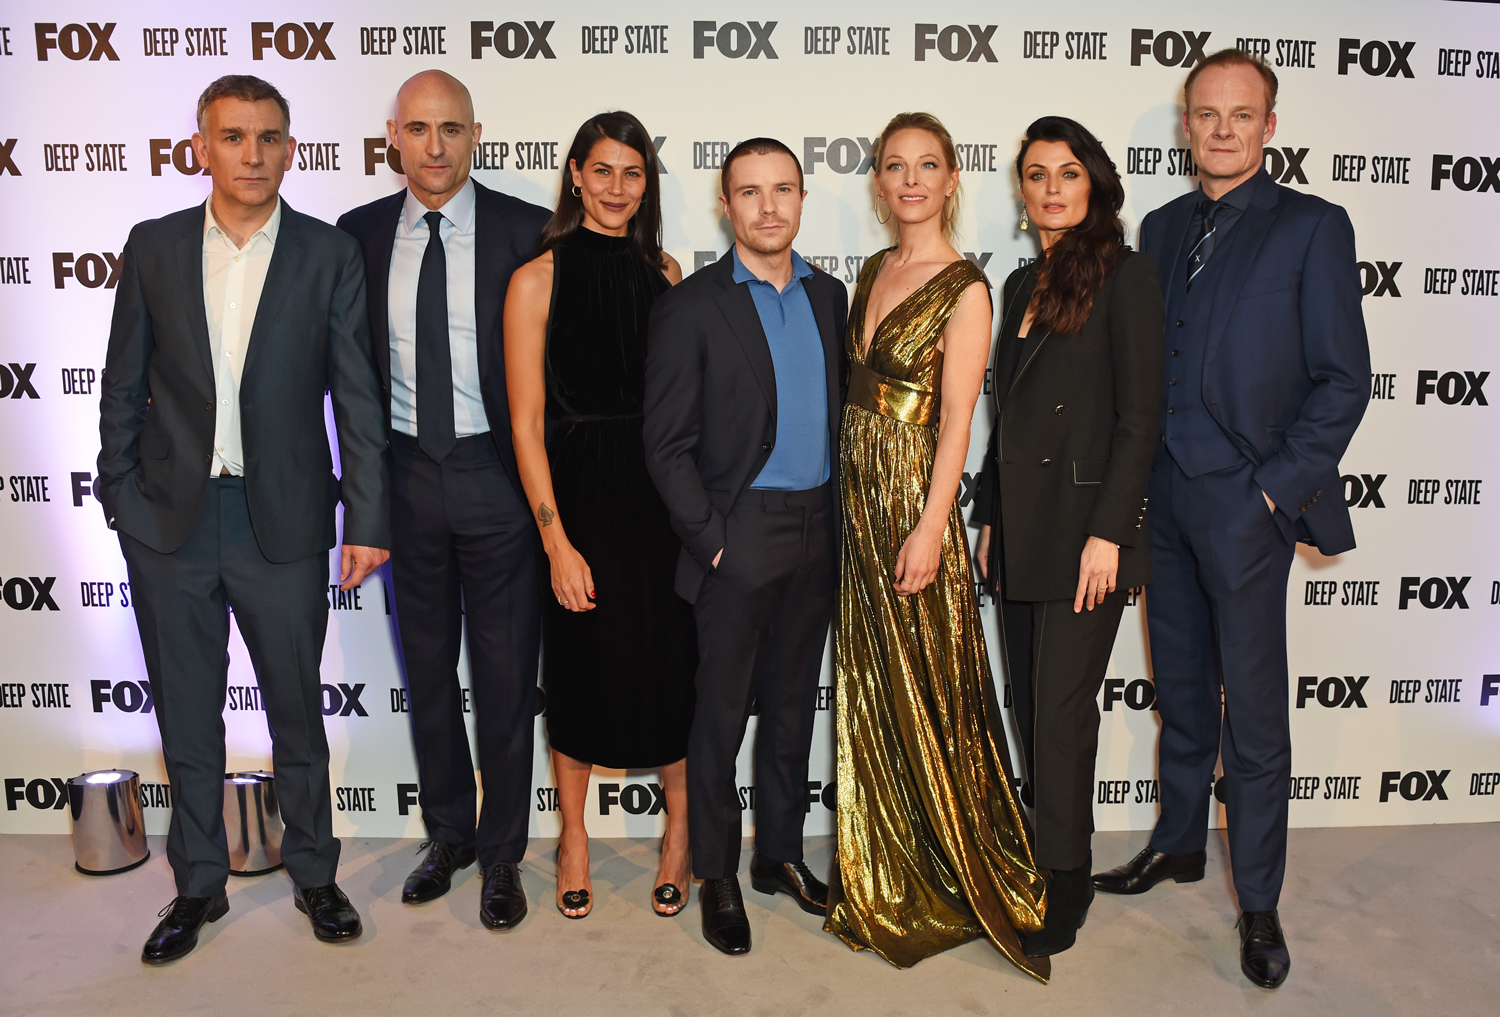 Cast of FOX's Deep State